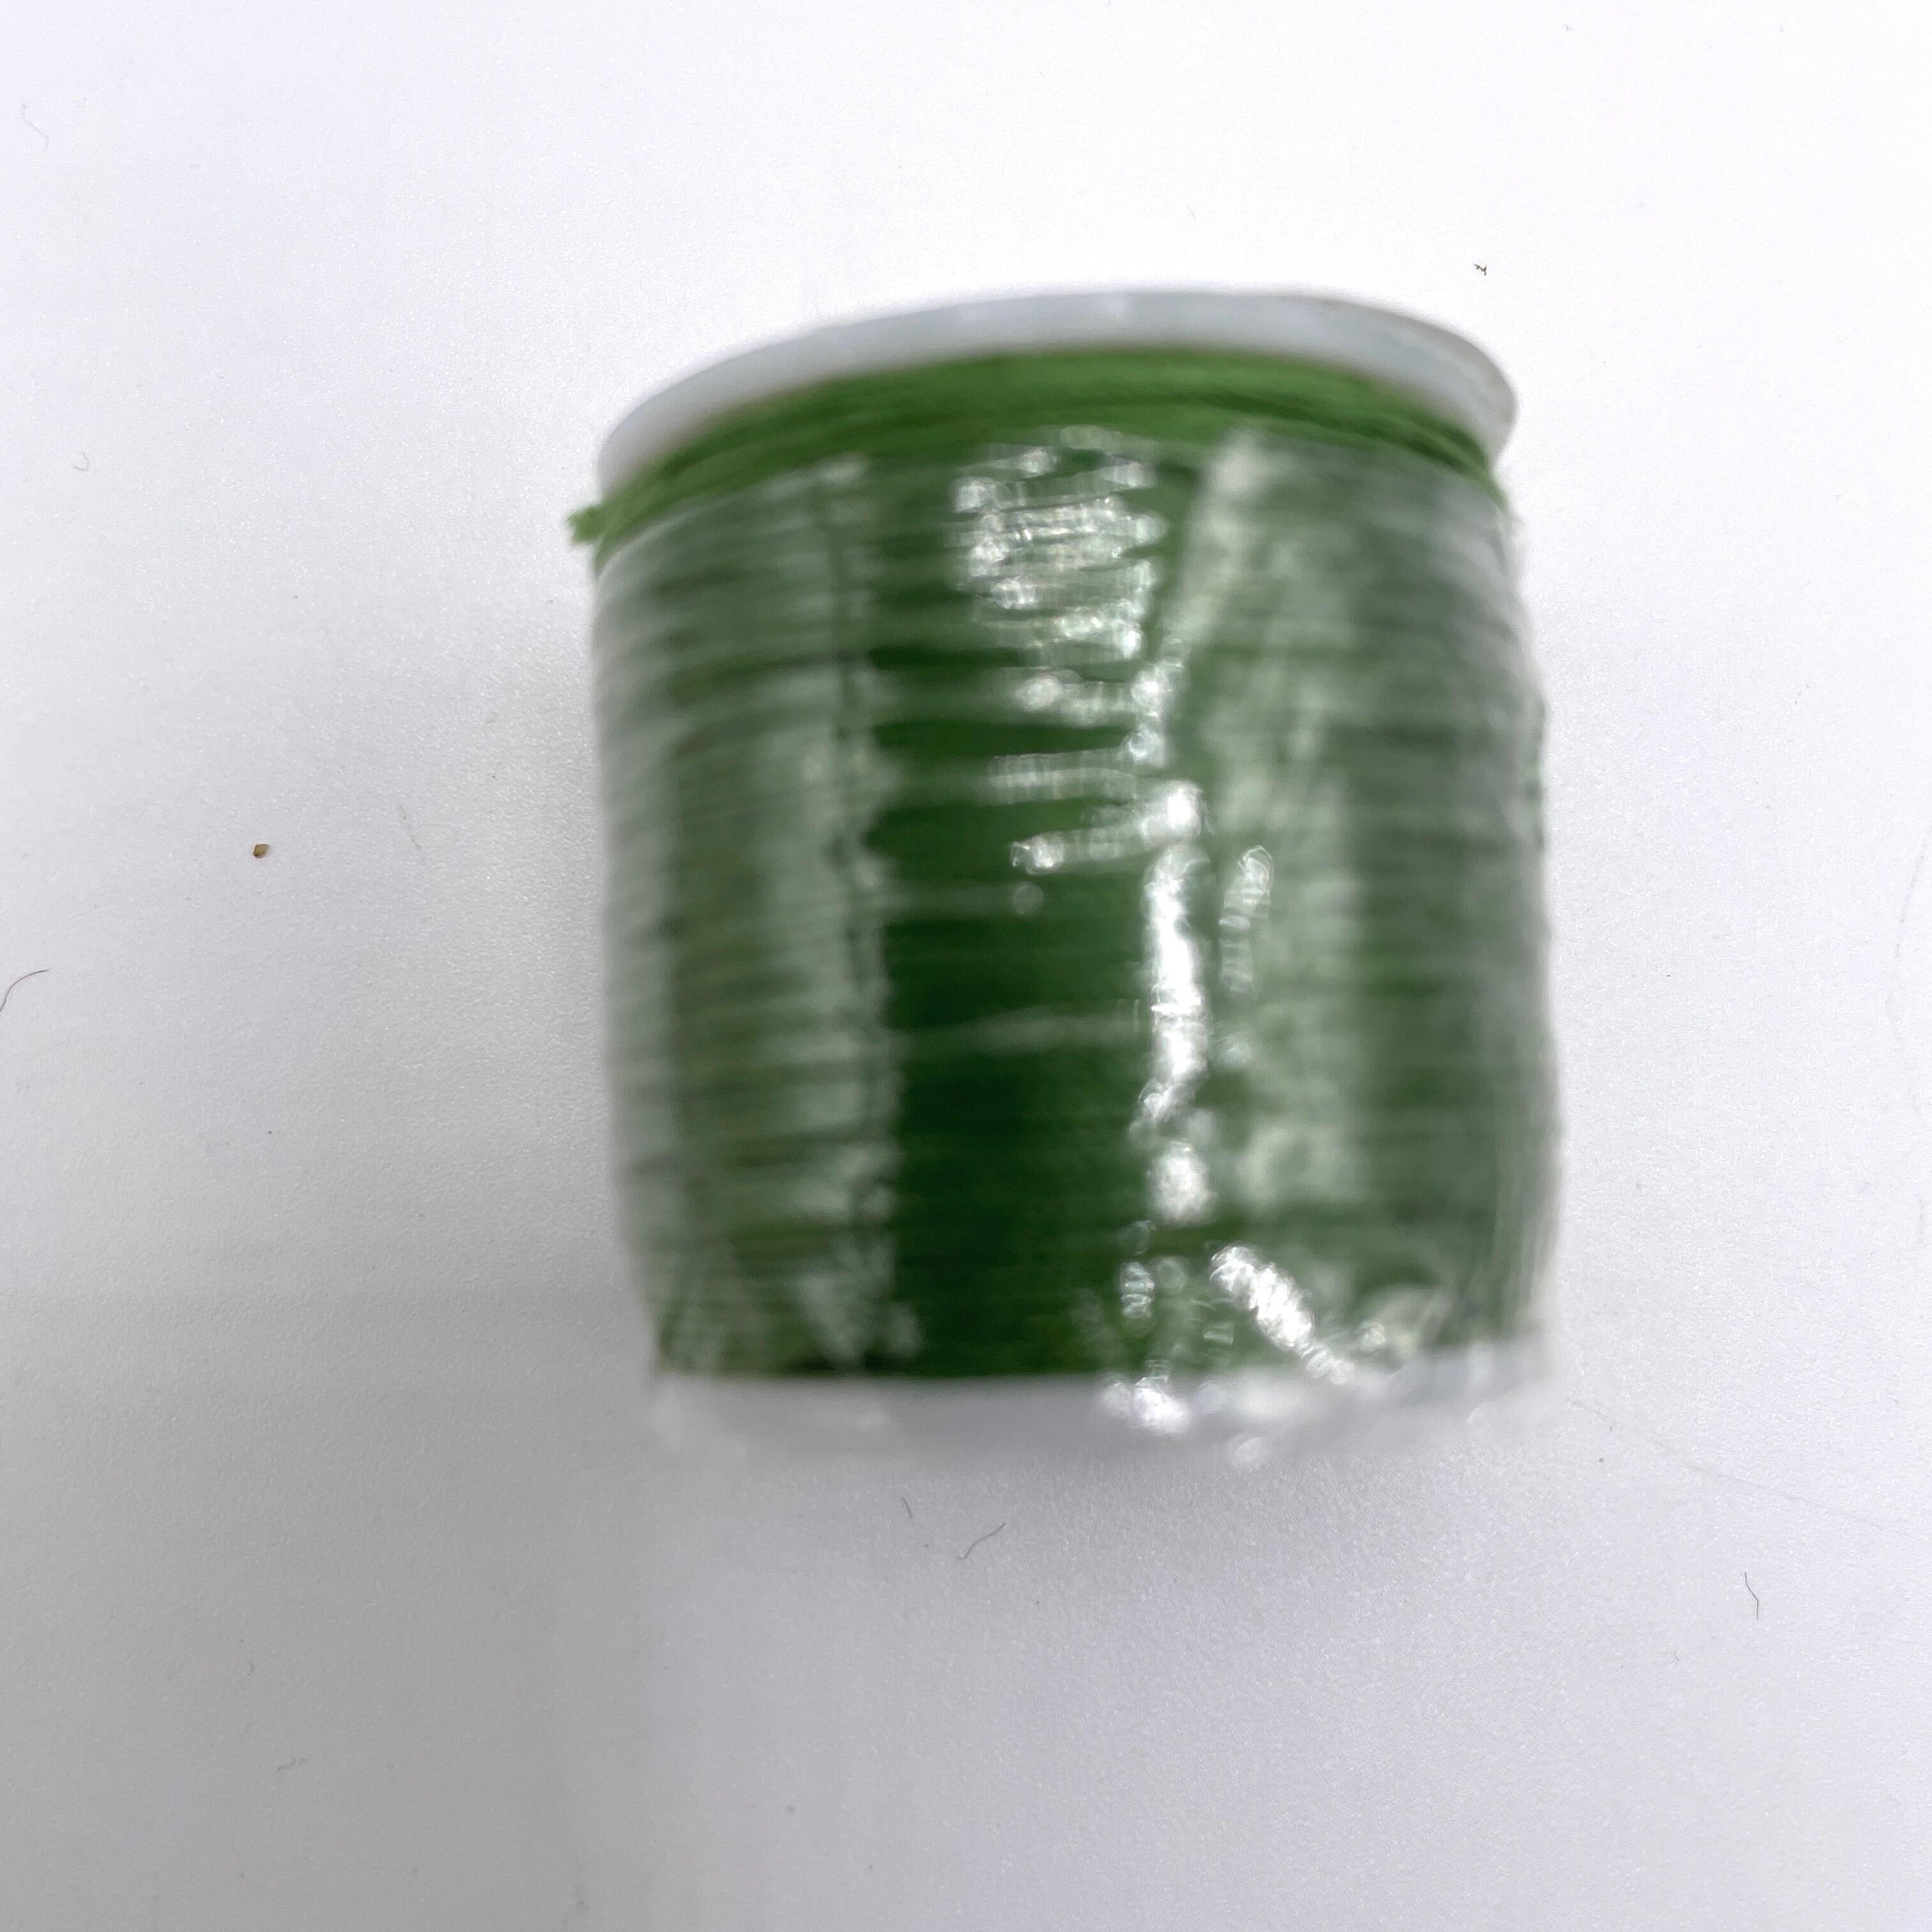 Thread - Extra strong - for buttons etc - 50 metres, per reel